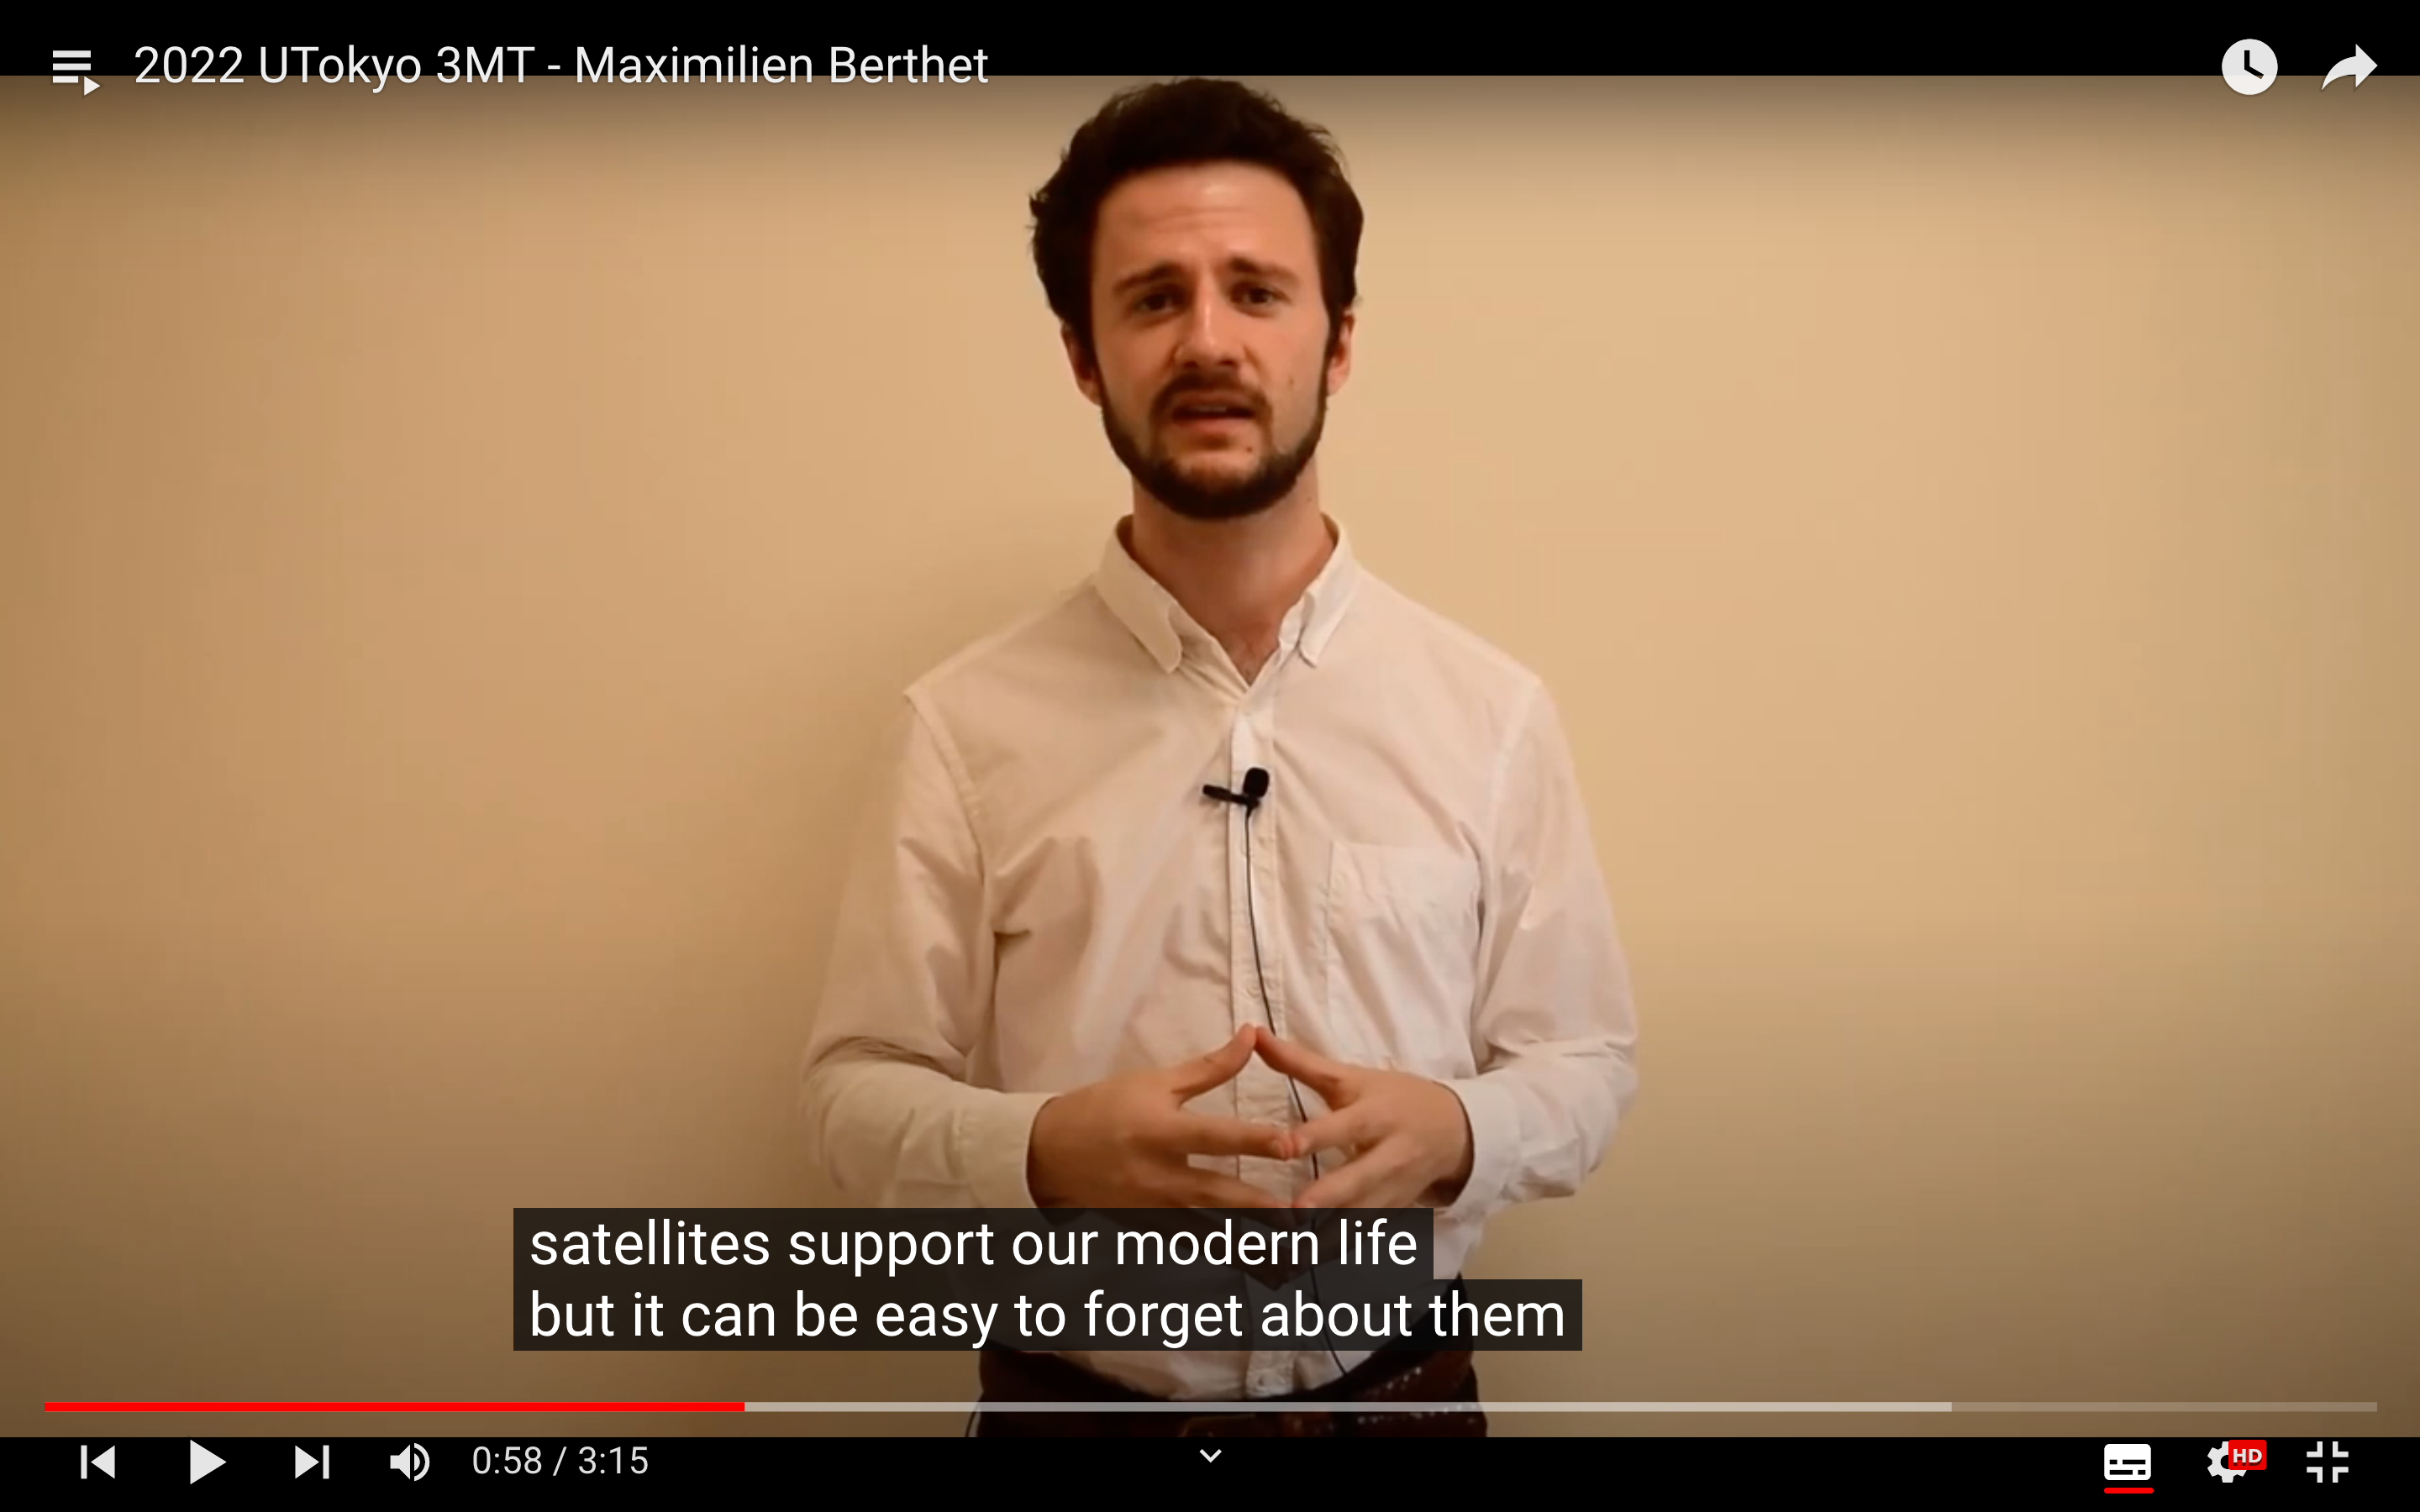 Maximilien Berthet stands in front of a white wall as he delivers his 3MT presentation, in a screenshot from his YouTube video.